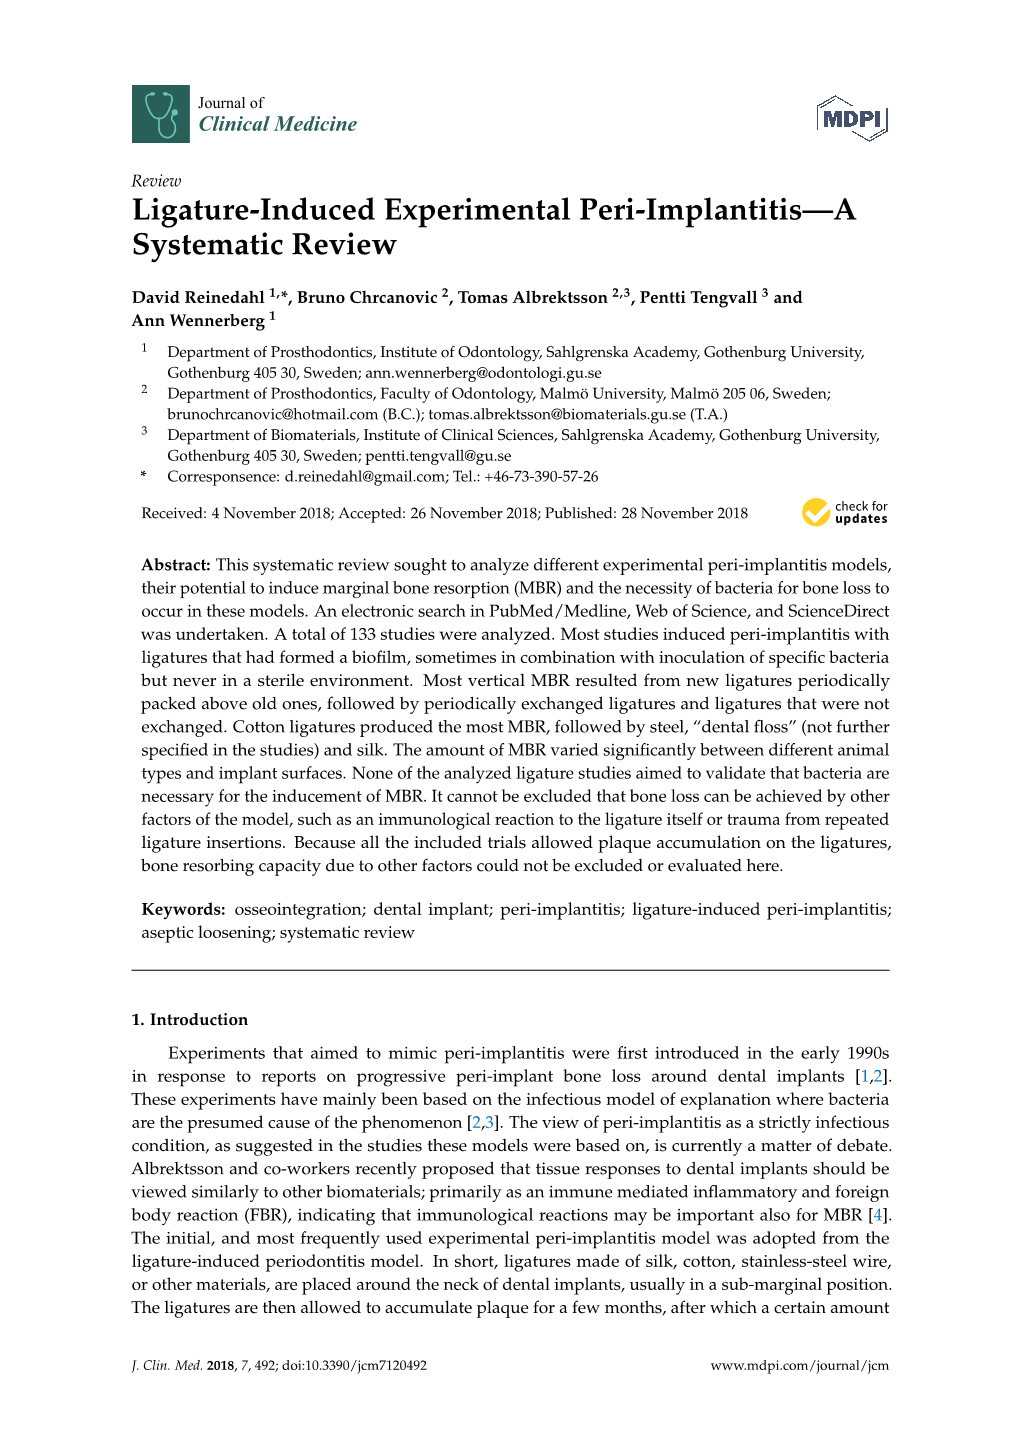 Ligature-Induced Experimental Peri-Implantitis—A Systematic Review